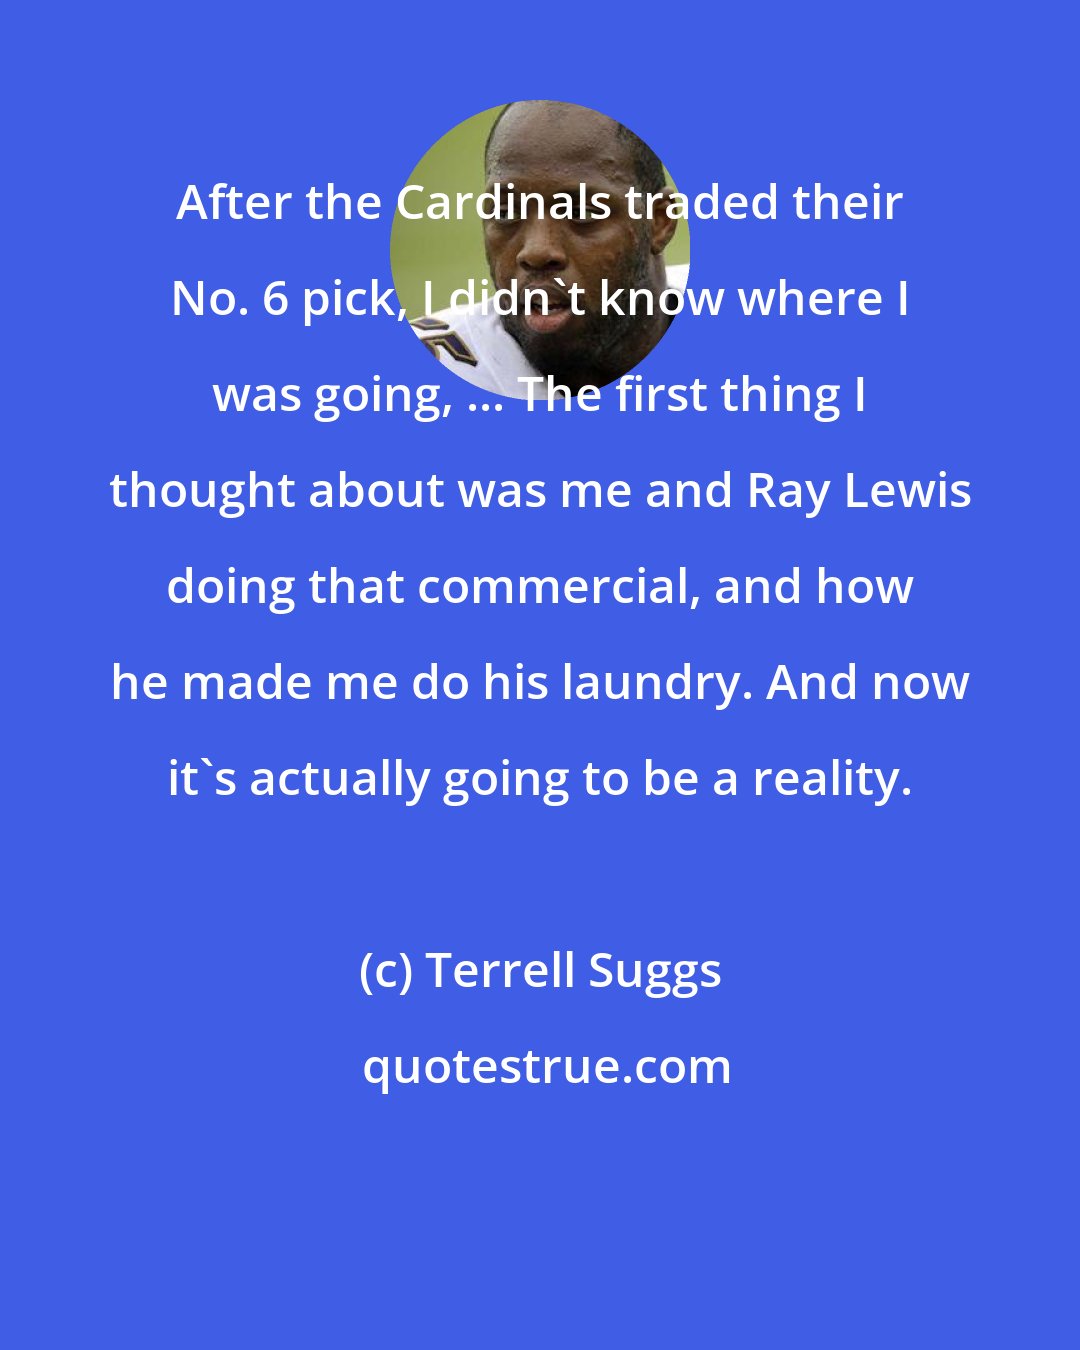 Terrell Suggs: After the Cardinals traded their No. 6 pick, I didn't know where I was going, ... The first thing I thought about was me and Ray Lewis doing that commercial, and how he made me do his laundry. And now it's actually going to be a reality.